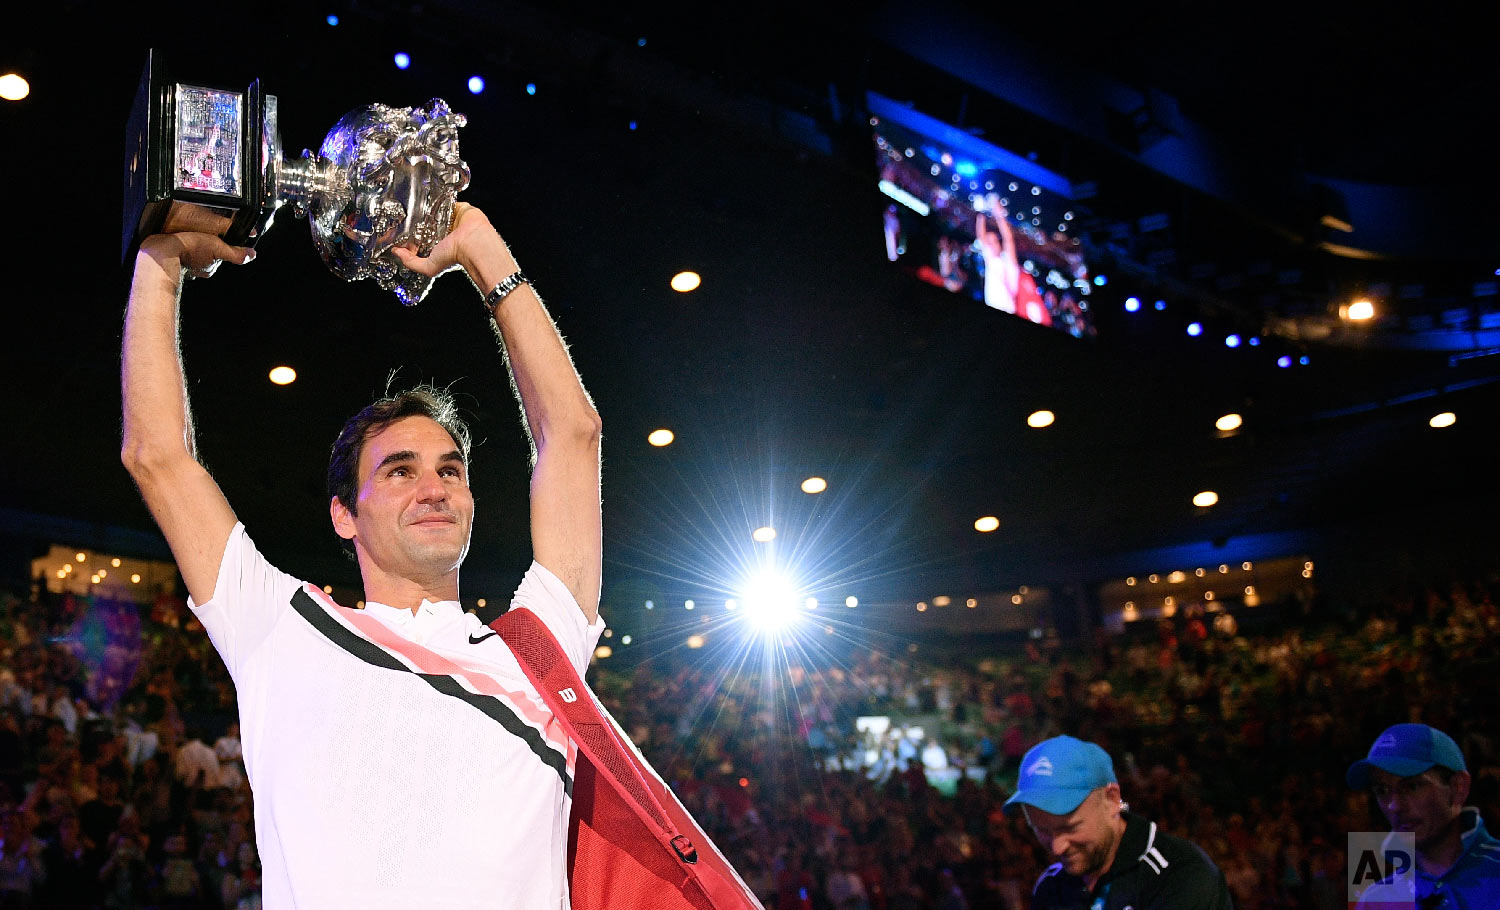  Switzerland's Roger Federer holds his trophy aloft after defeating Croatia's Marin Cilic during the men's singles final at the Australian Open tennis championships in Melbourne, Australia, Sunday, Jan. 28, 2018. (AP Photo/Andy Brownbill) 